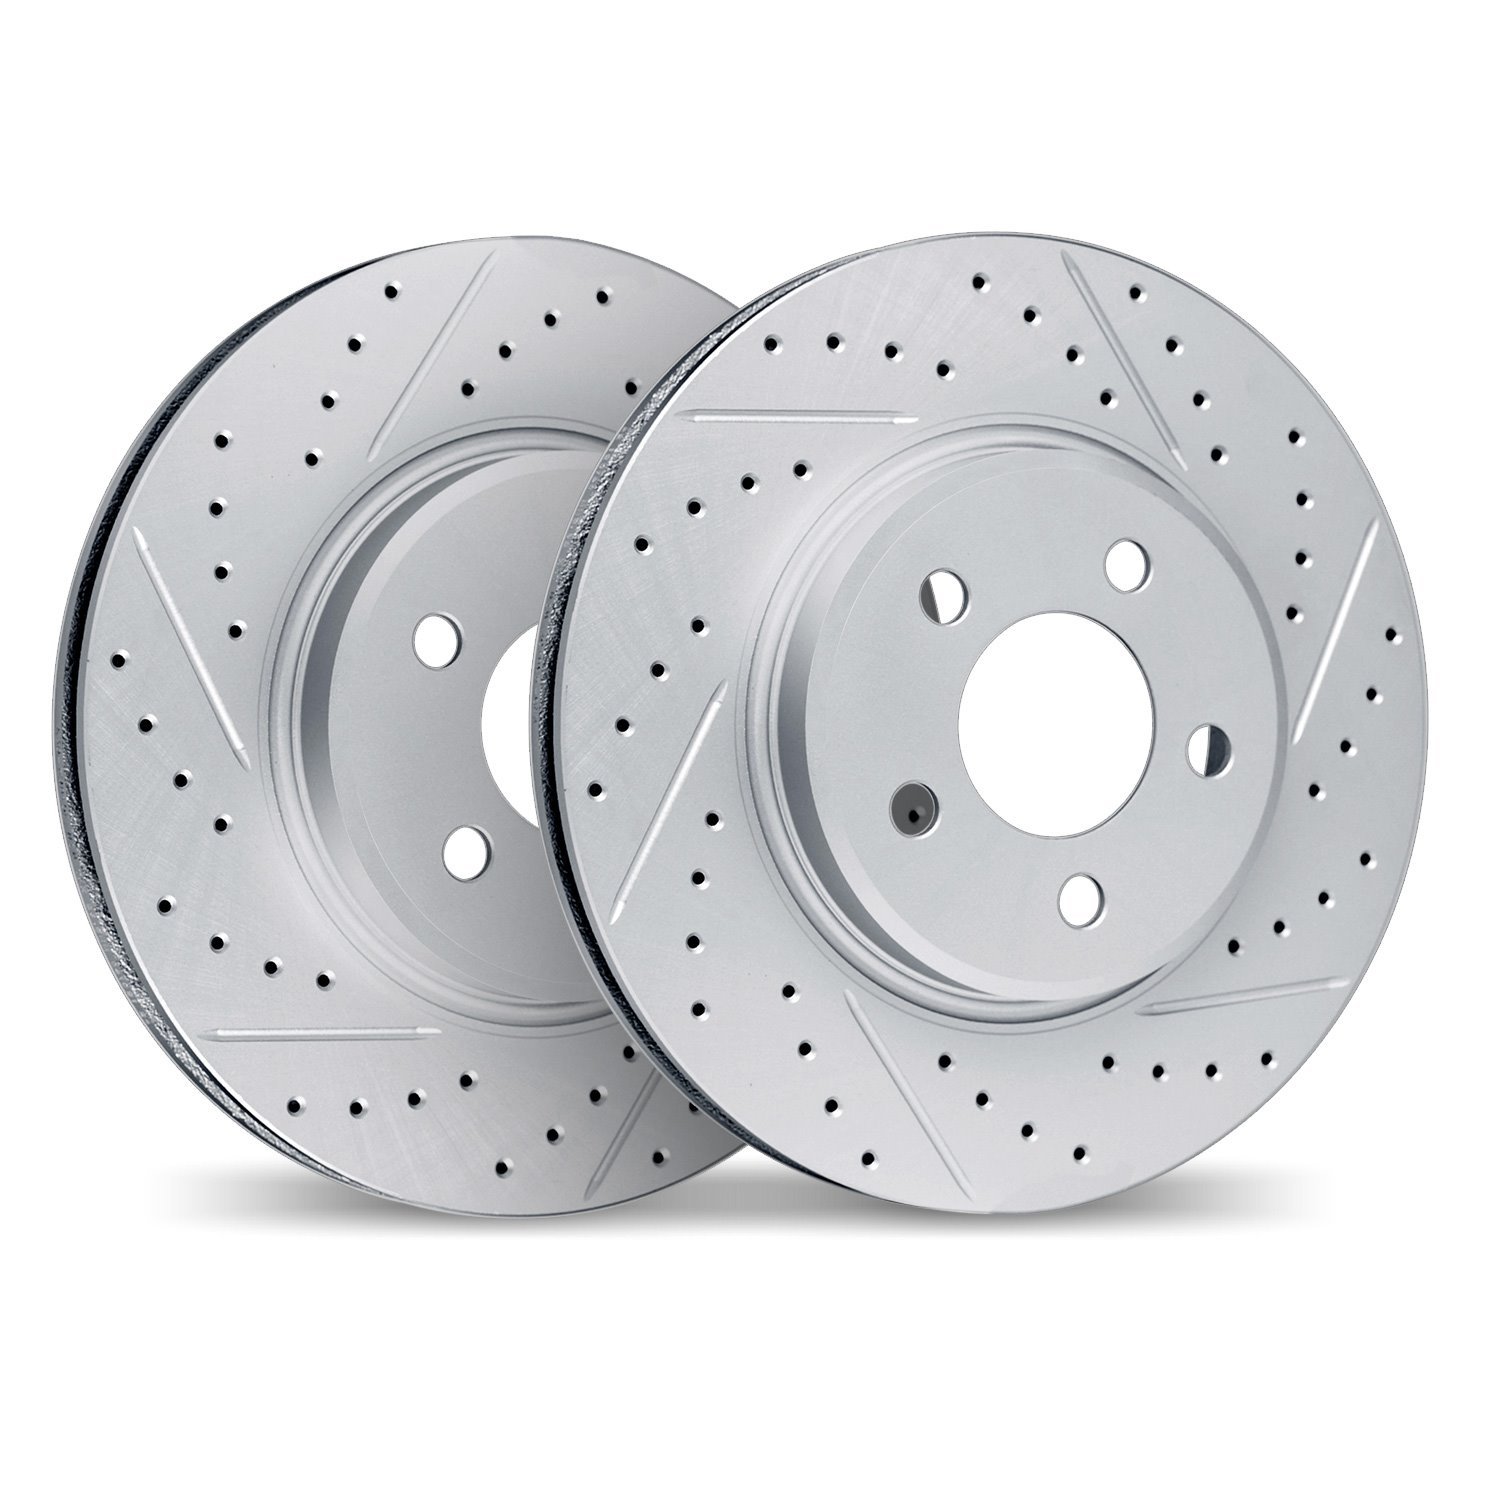 2002-13009 Geoperformance Drilled/Slotted Brake Rotors, Fits Select Subaru, Position: Front